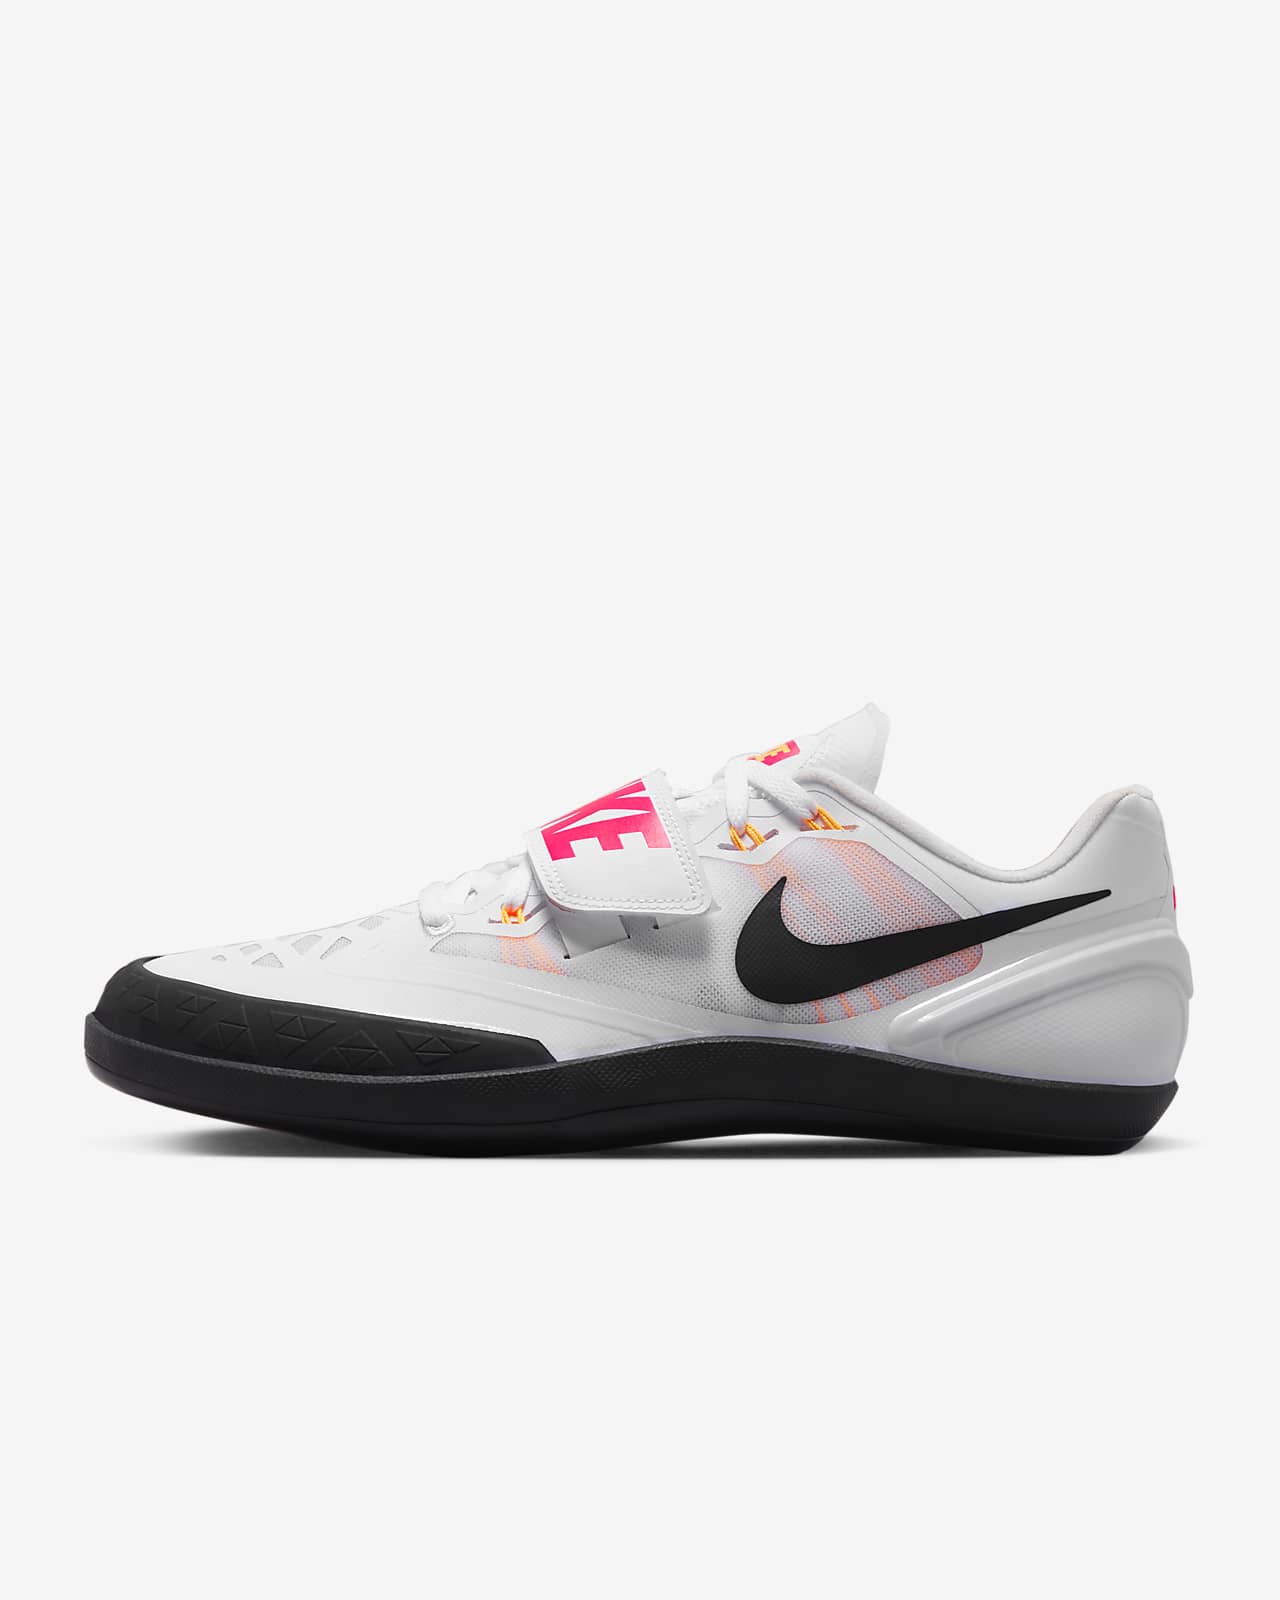 Total 43+ imagen nike rotational throwing shoes - Abzlocal.mx